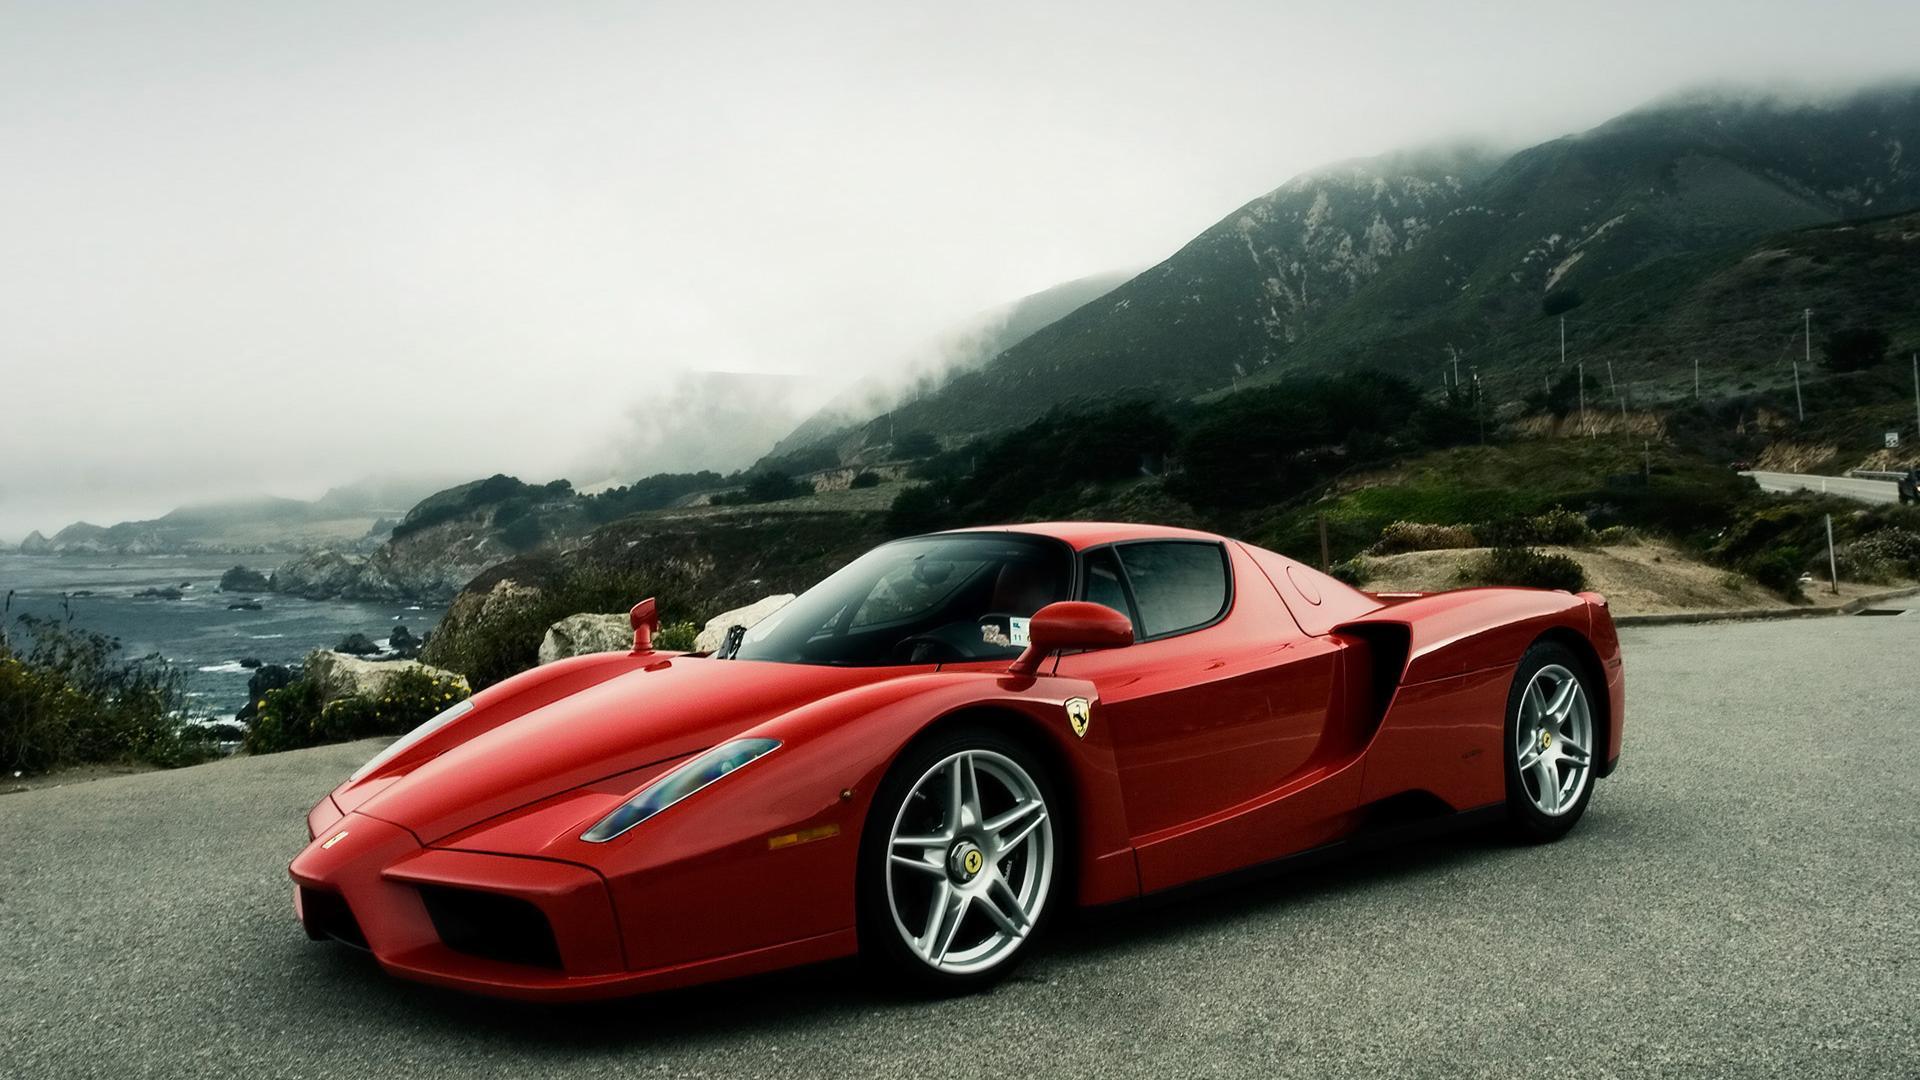 Cars Wallpaper, PK37 100% Quality HD Cars Picture Mobile, PC